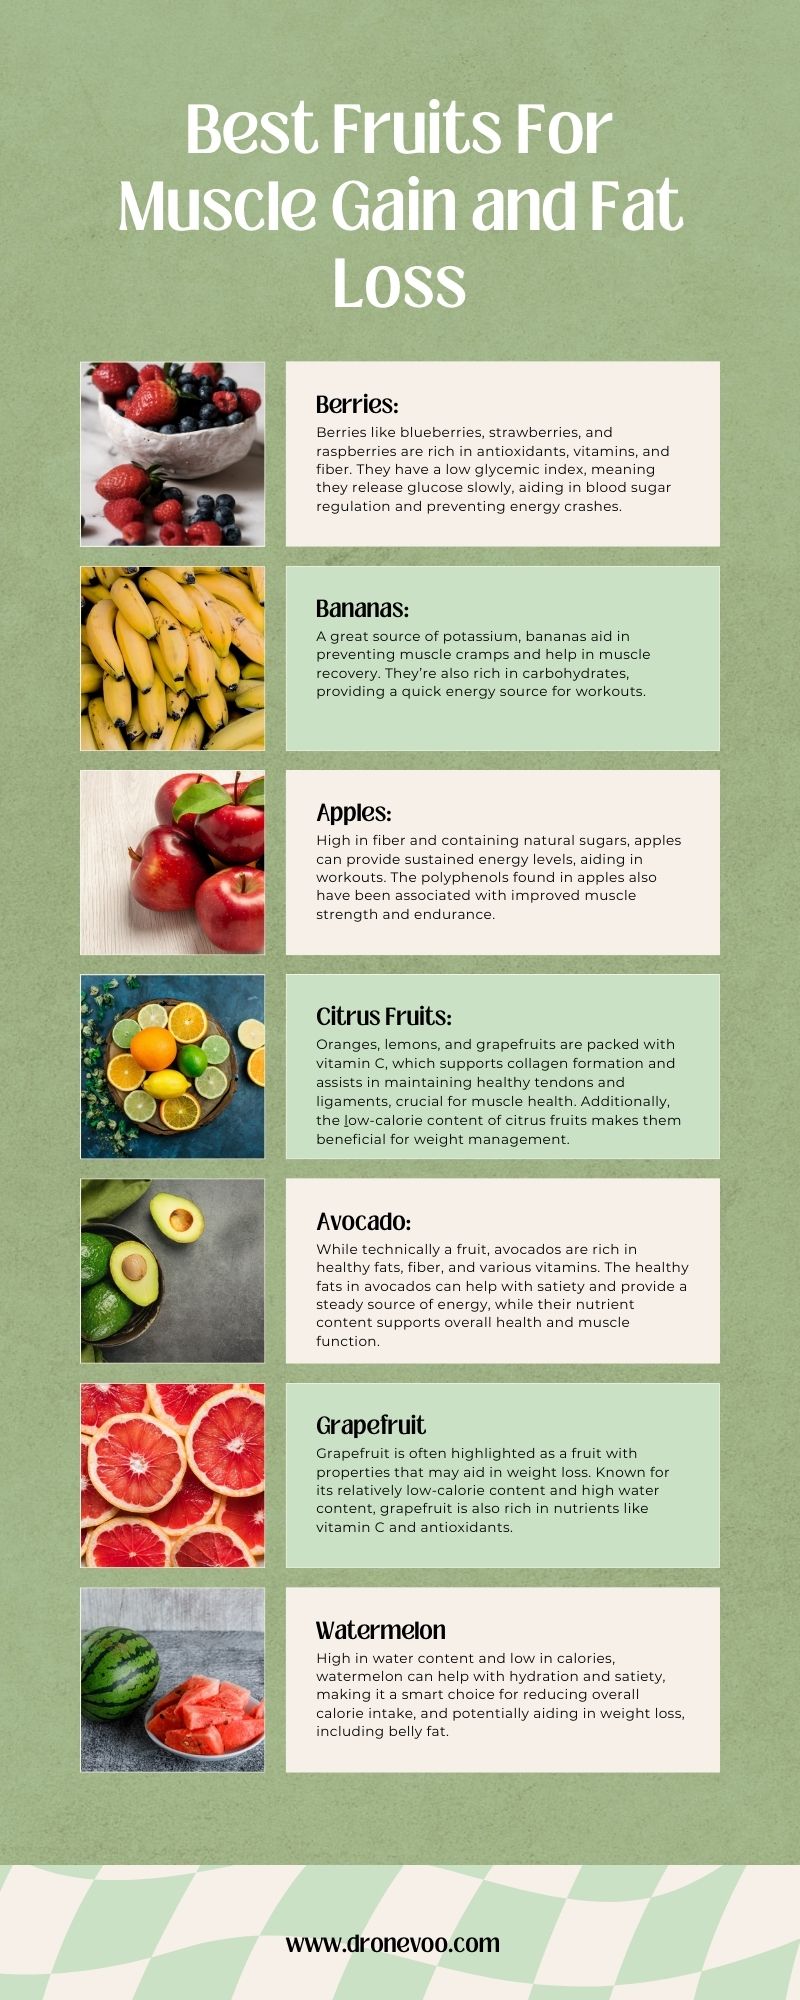 Best Fruits for Muscle Gain and Fat Loss